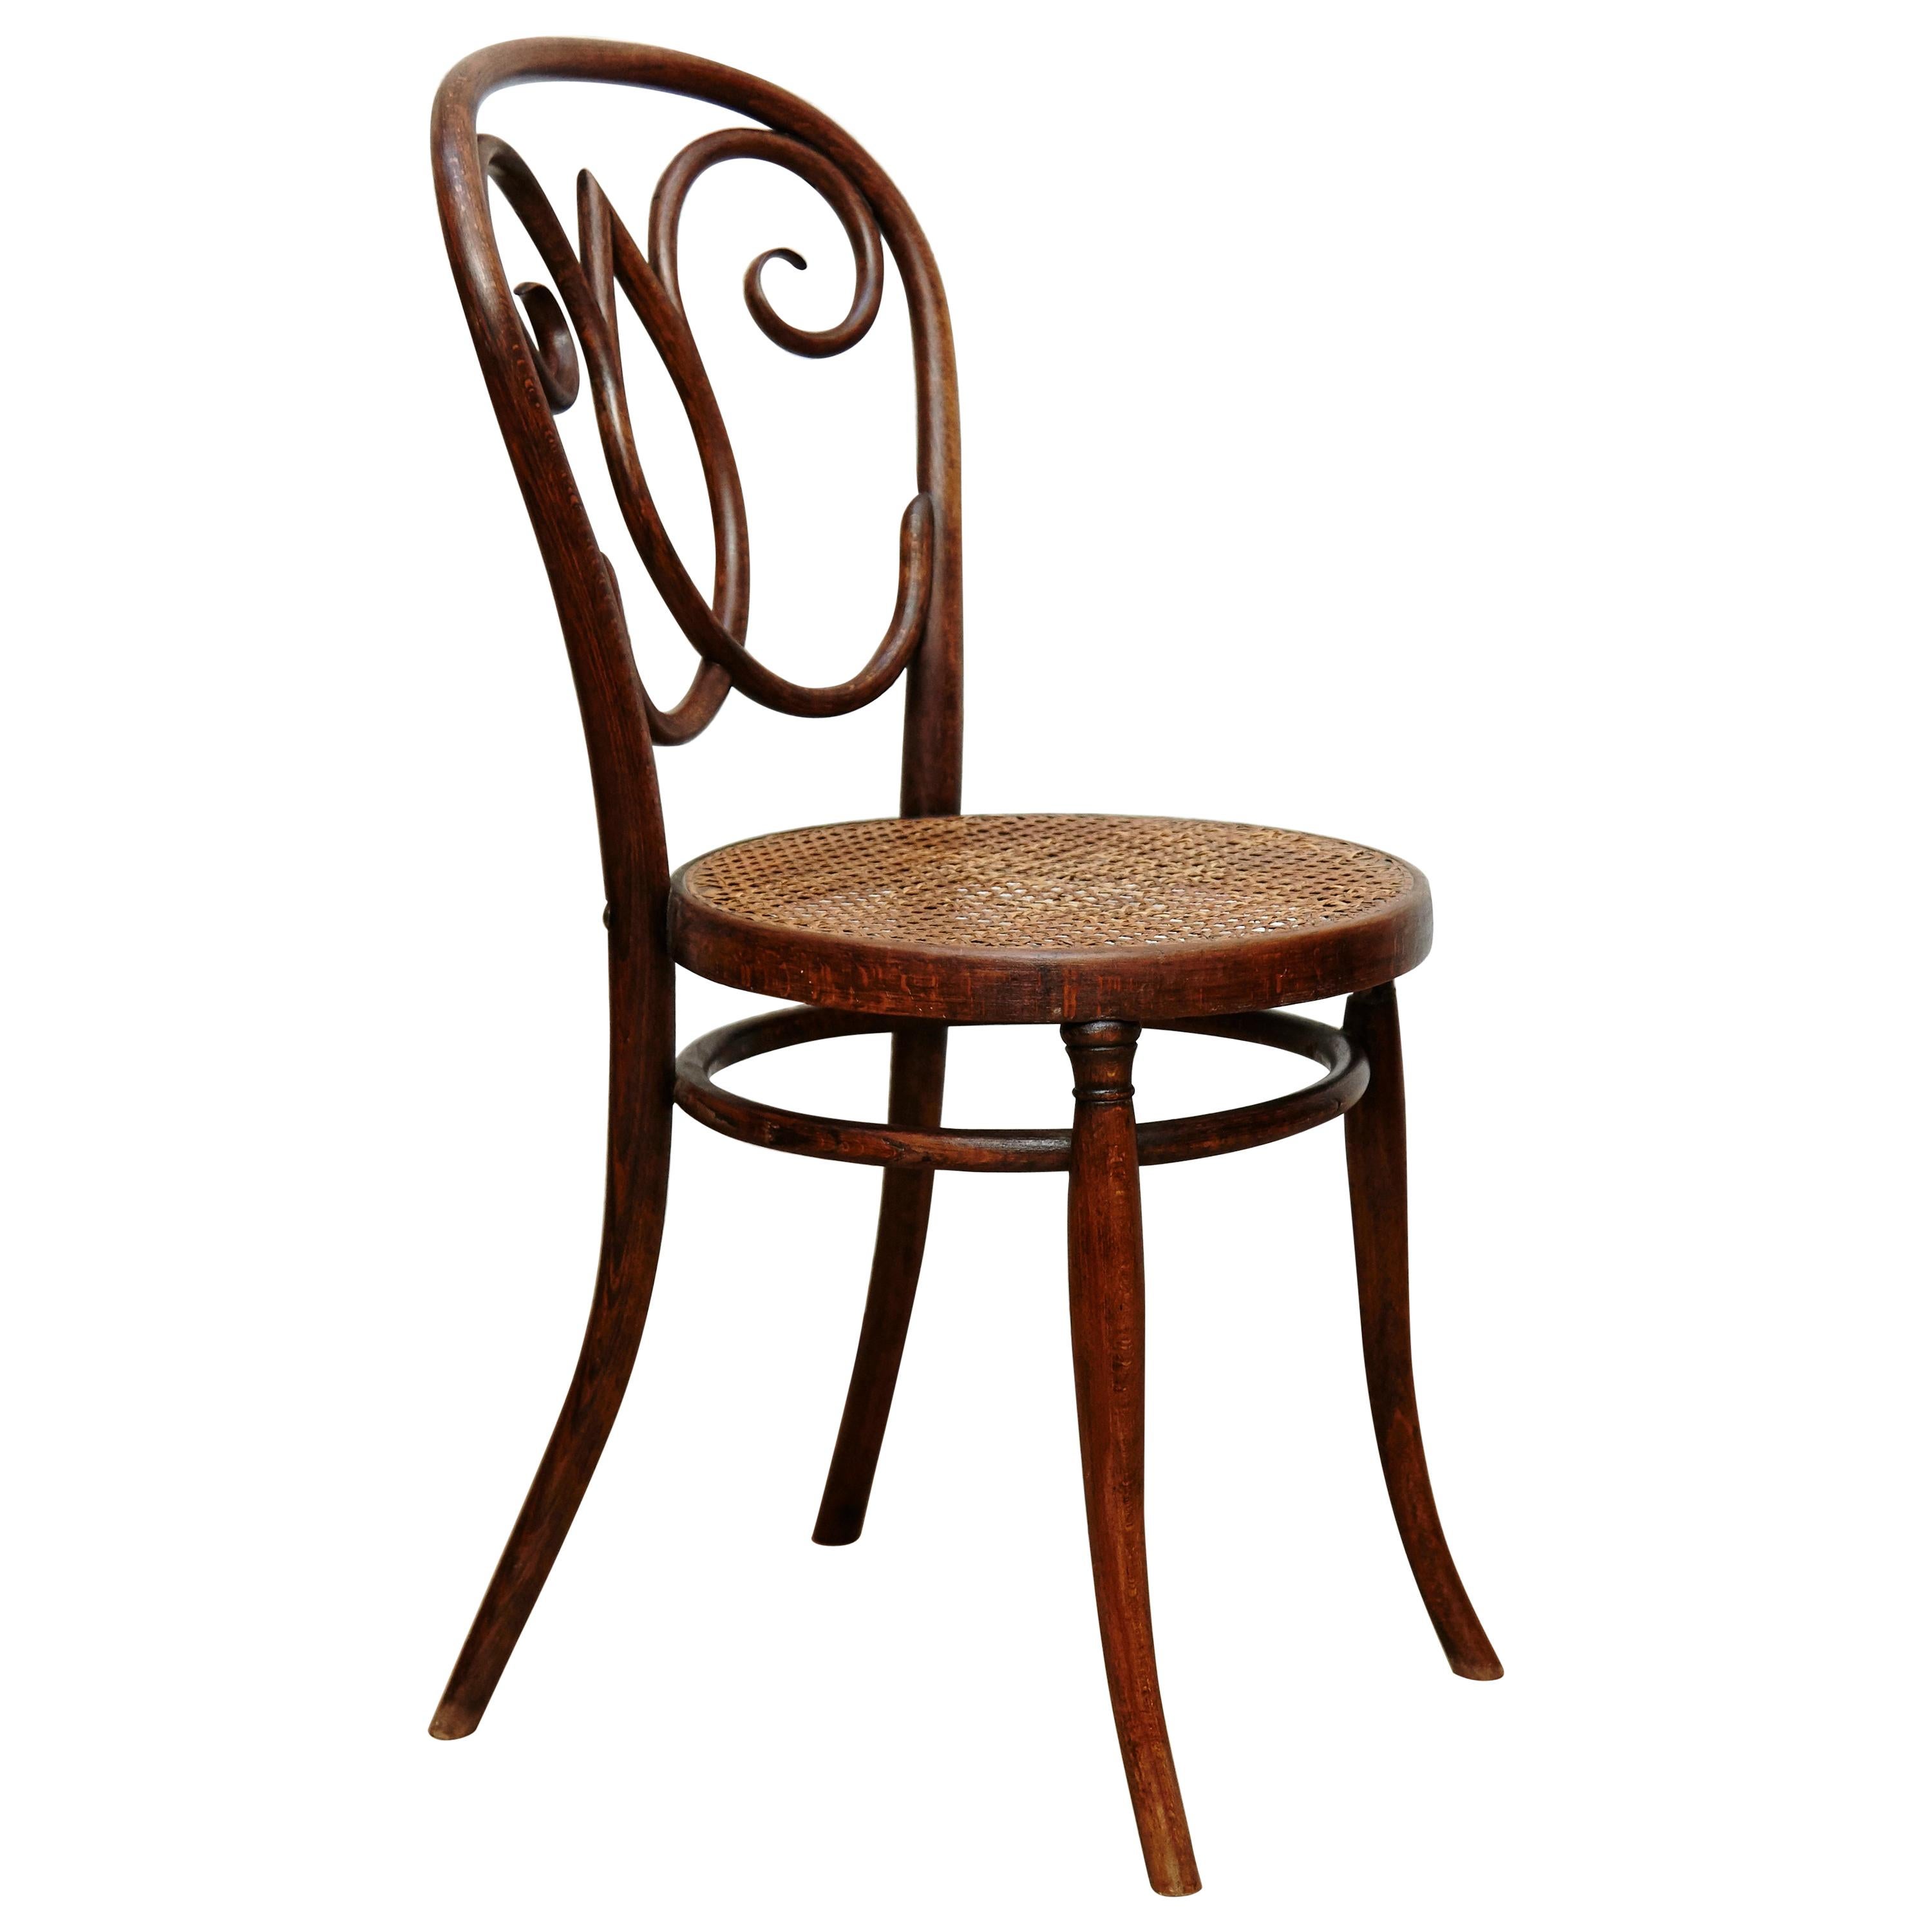 Rare Bentwood and Rattan Chair in The Style of Thonet, circa 1920